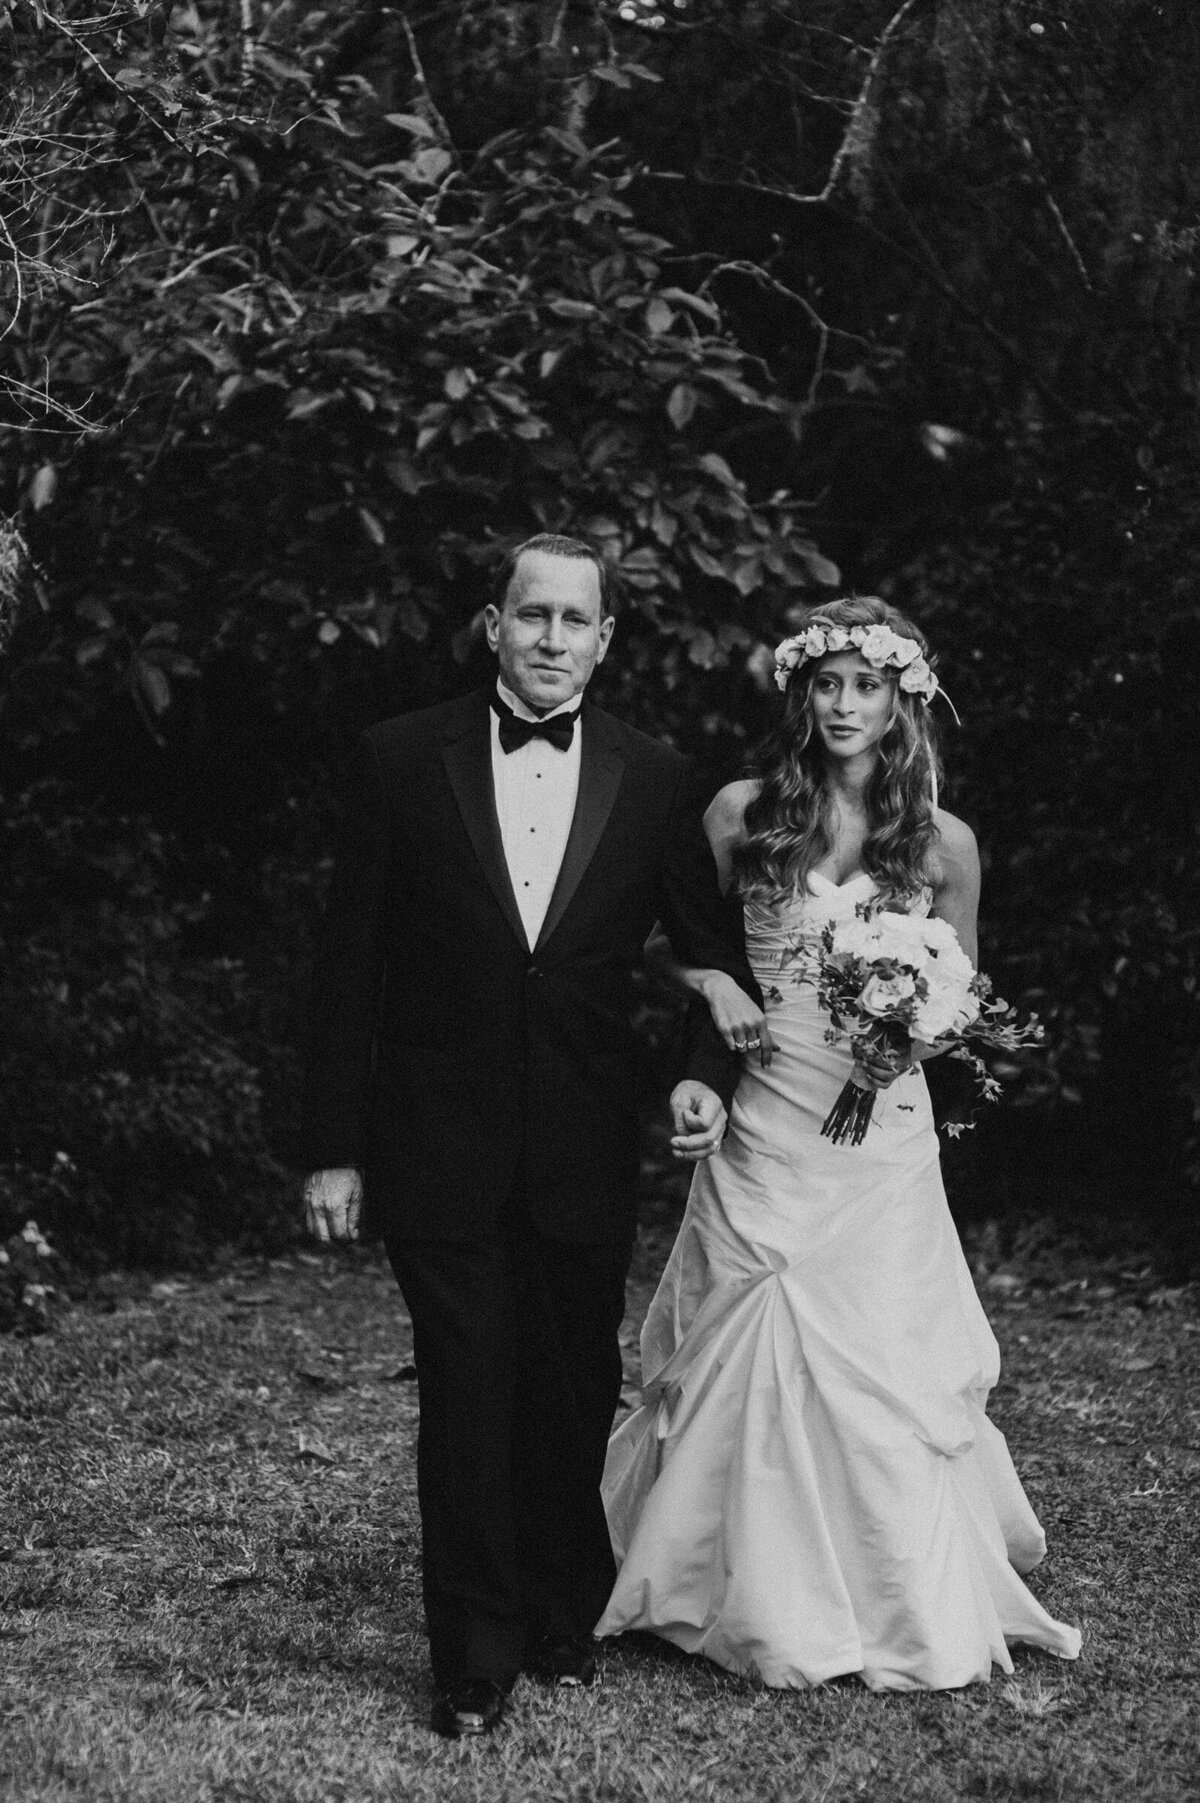 A black and white photo of a bride walking arm in arm with an older man through a garden